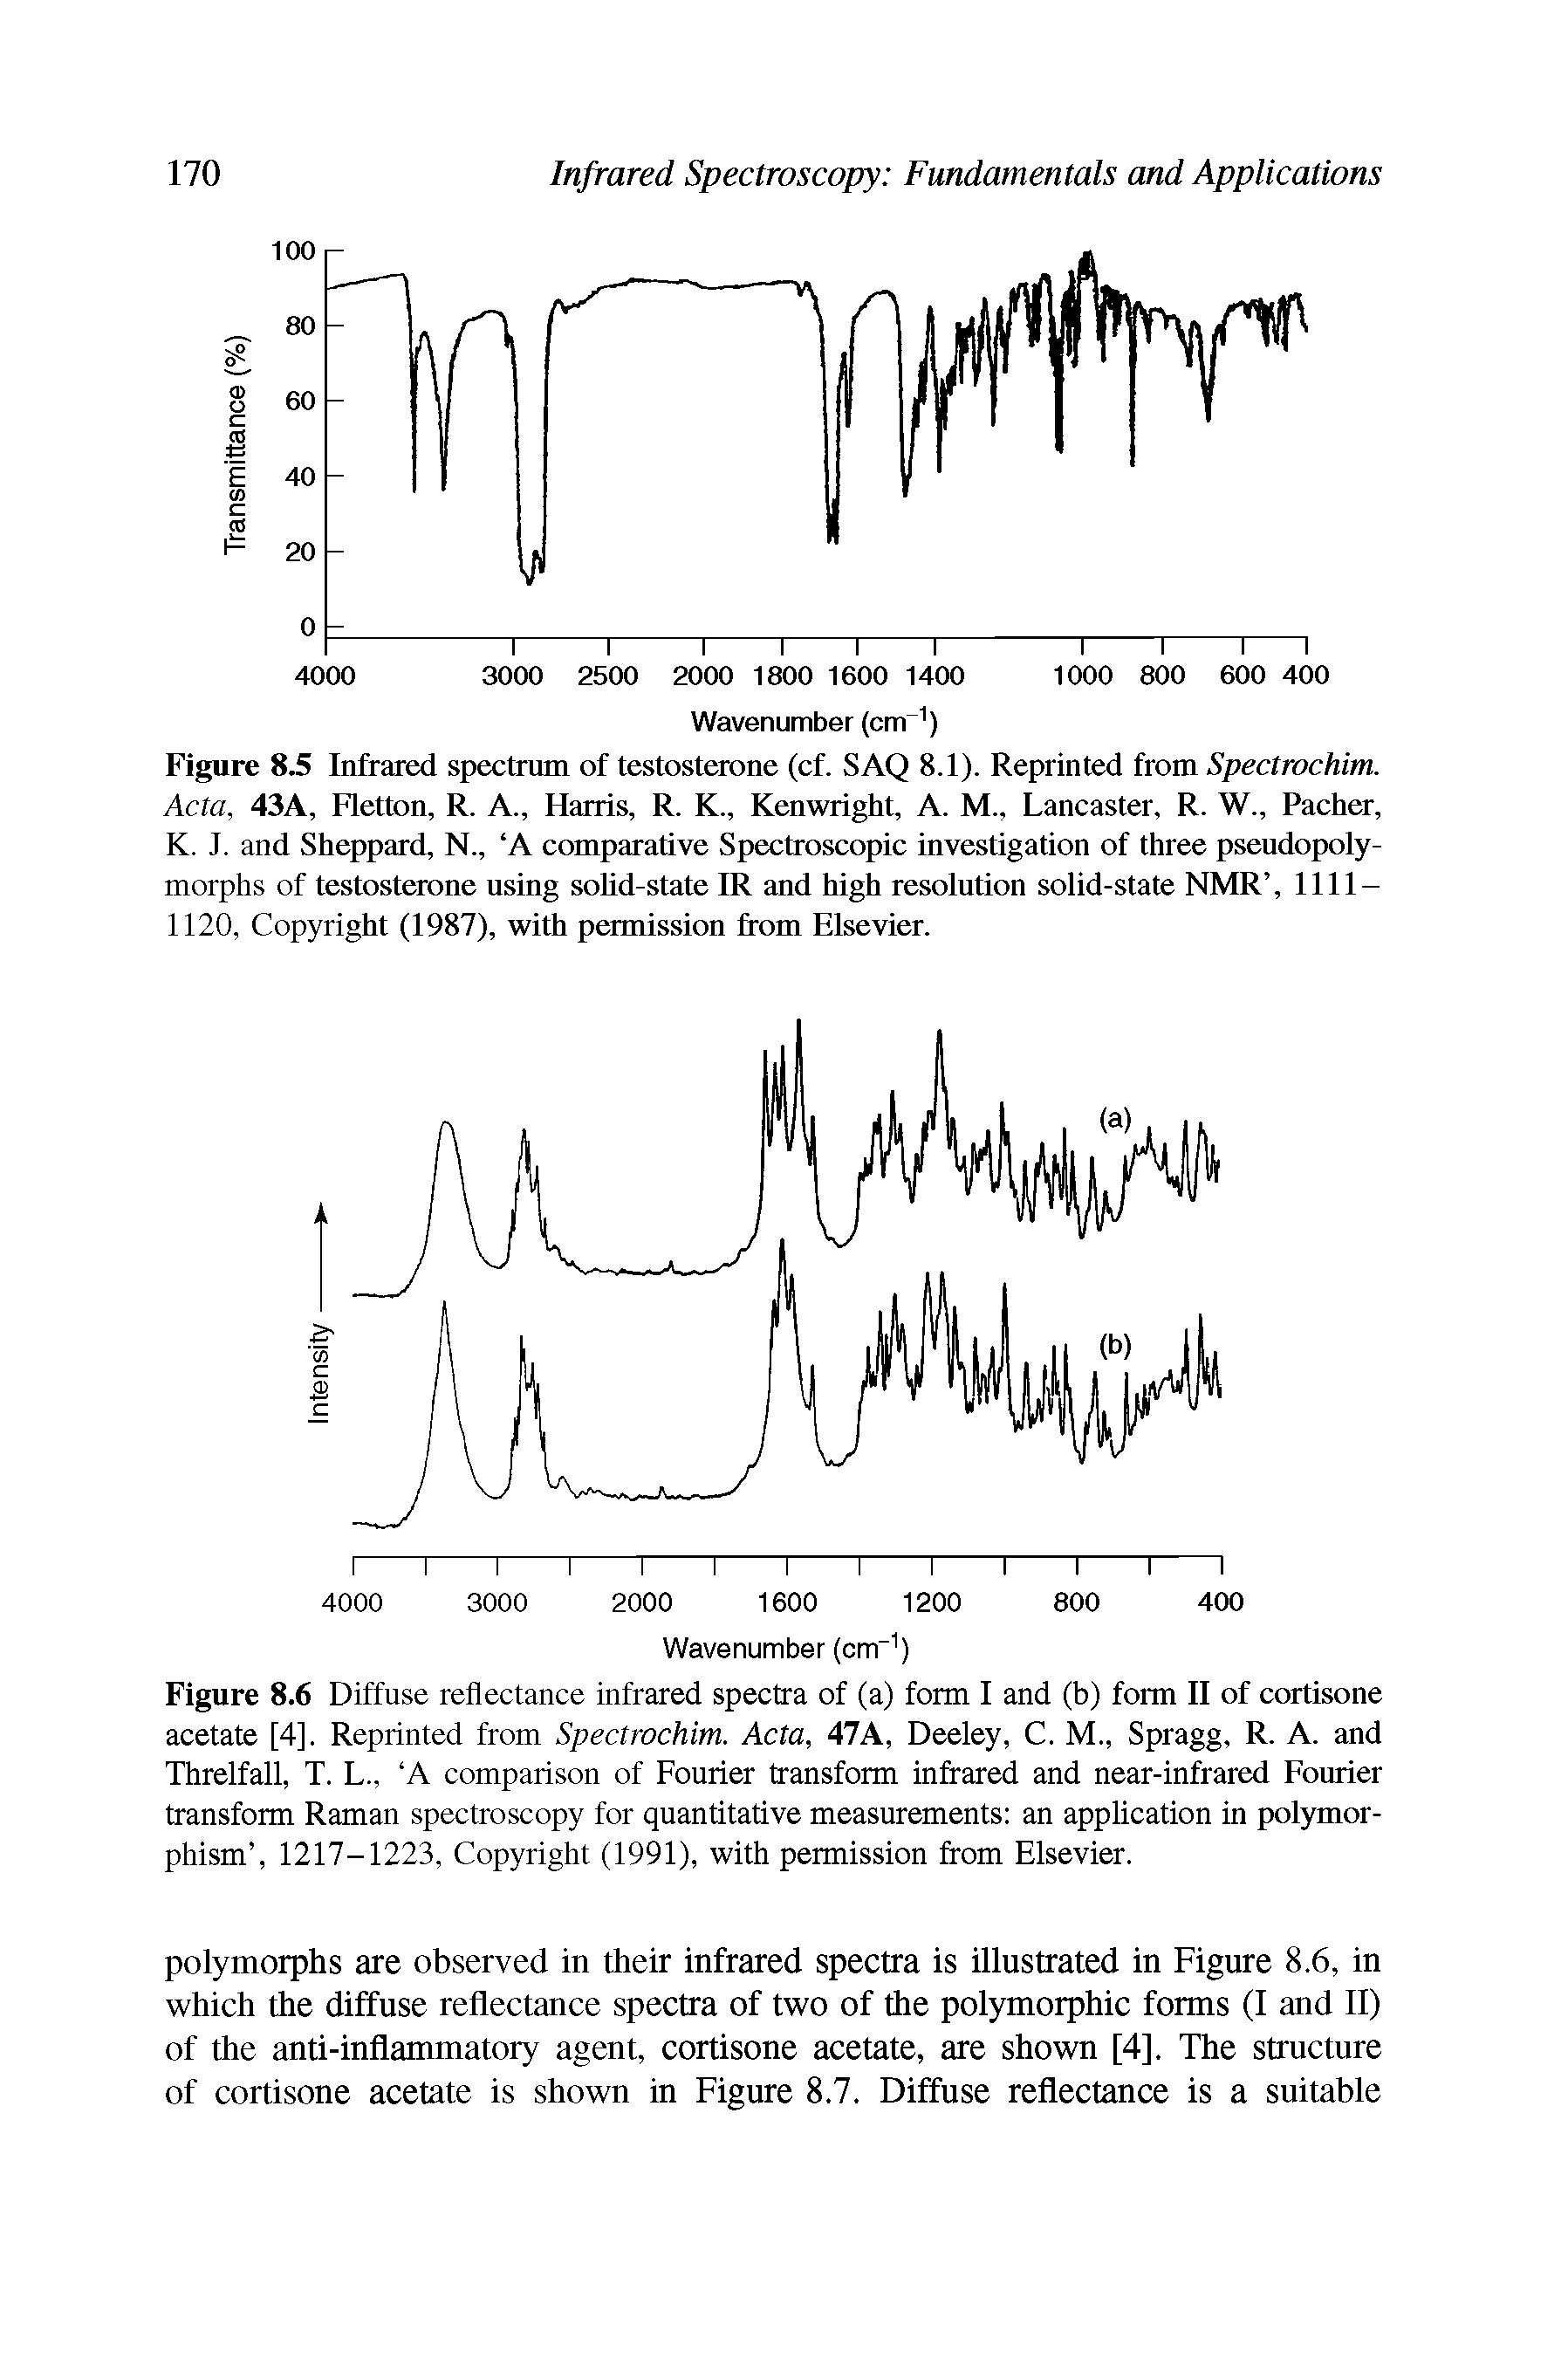 Figure 8.5 Infrared spectrum of testosterone (cf. SAQ 8.1). Reprinted from Spectrochim. Acta, 43A, Fletton, R. A., Harris, R. K., Kenwright, A. M., Lancaster, R. W., Pacher, K. J. and Sheppard, N., A comparative Spectroscopic investigation of three pseudopolymorphs of testosterone using sohd-state IR and high resolution solid-state NMR , 1111-1120, Copyright (1987), with permission from Elsevier.